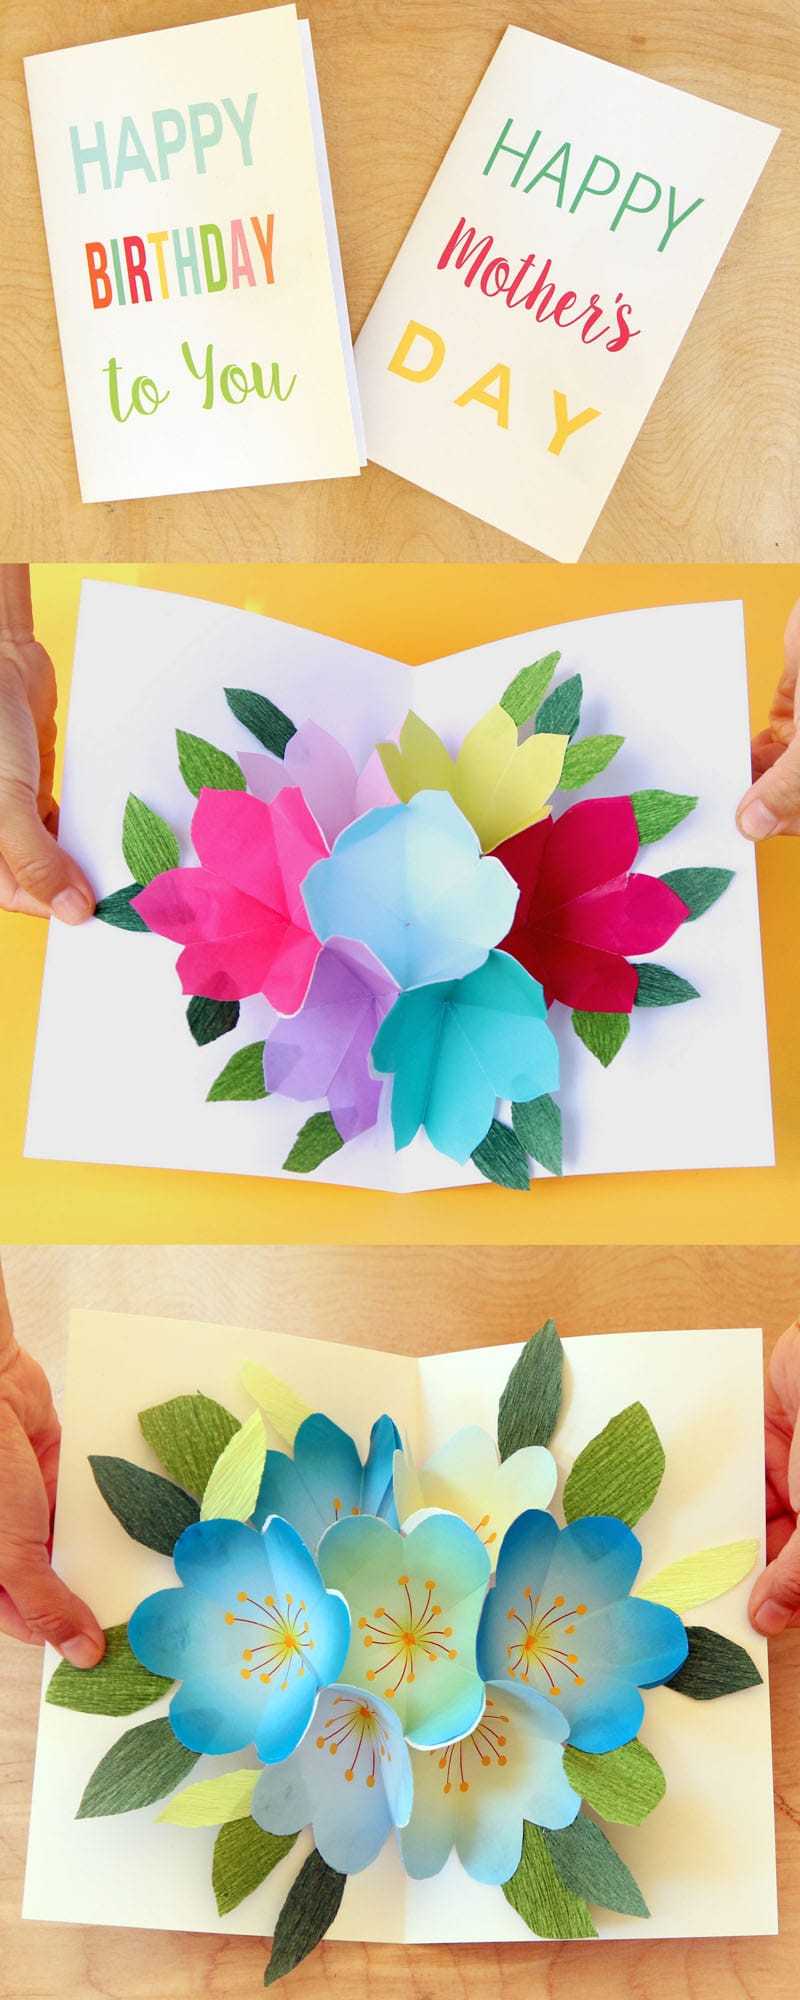 Free Printable Happy Birthday Card With Pop Up Bouquet – A Regarding Happy Birthday Pop Up Card Free Template